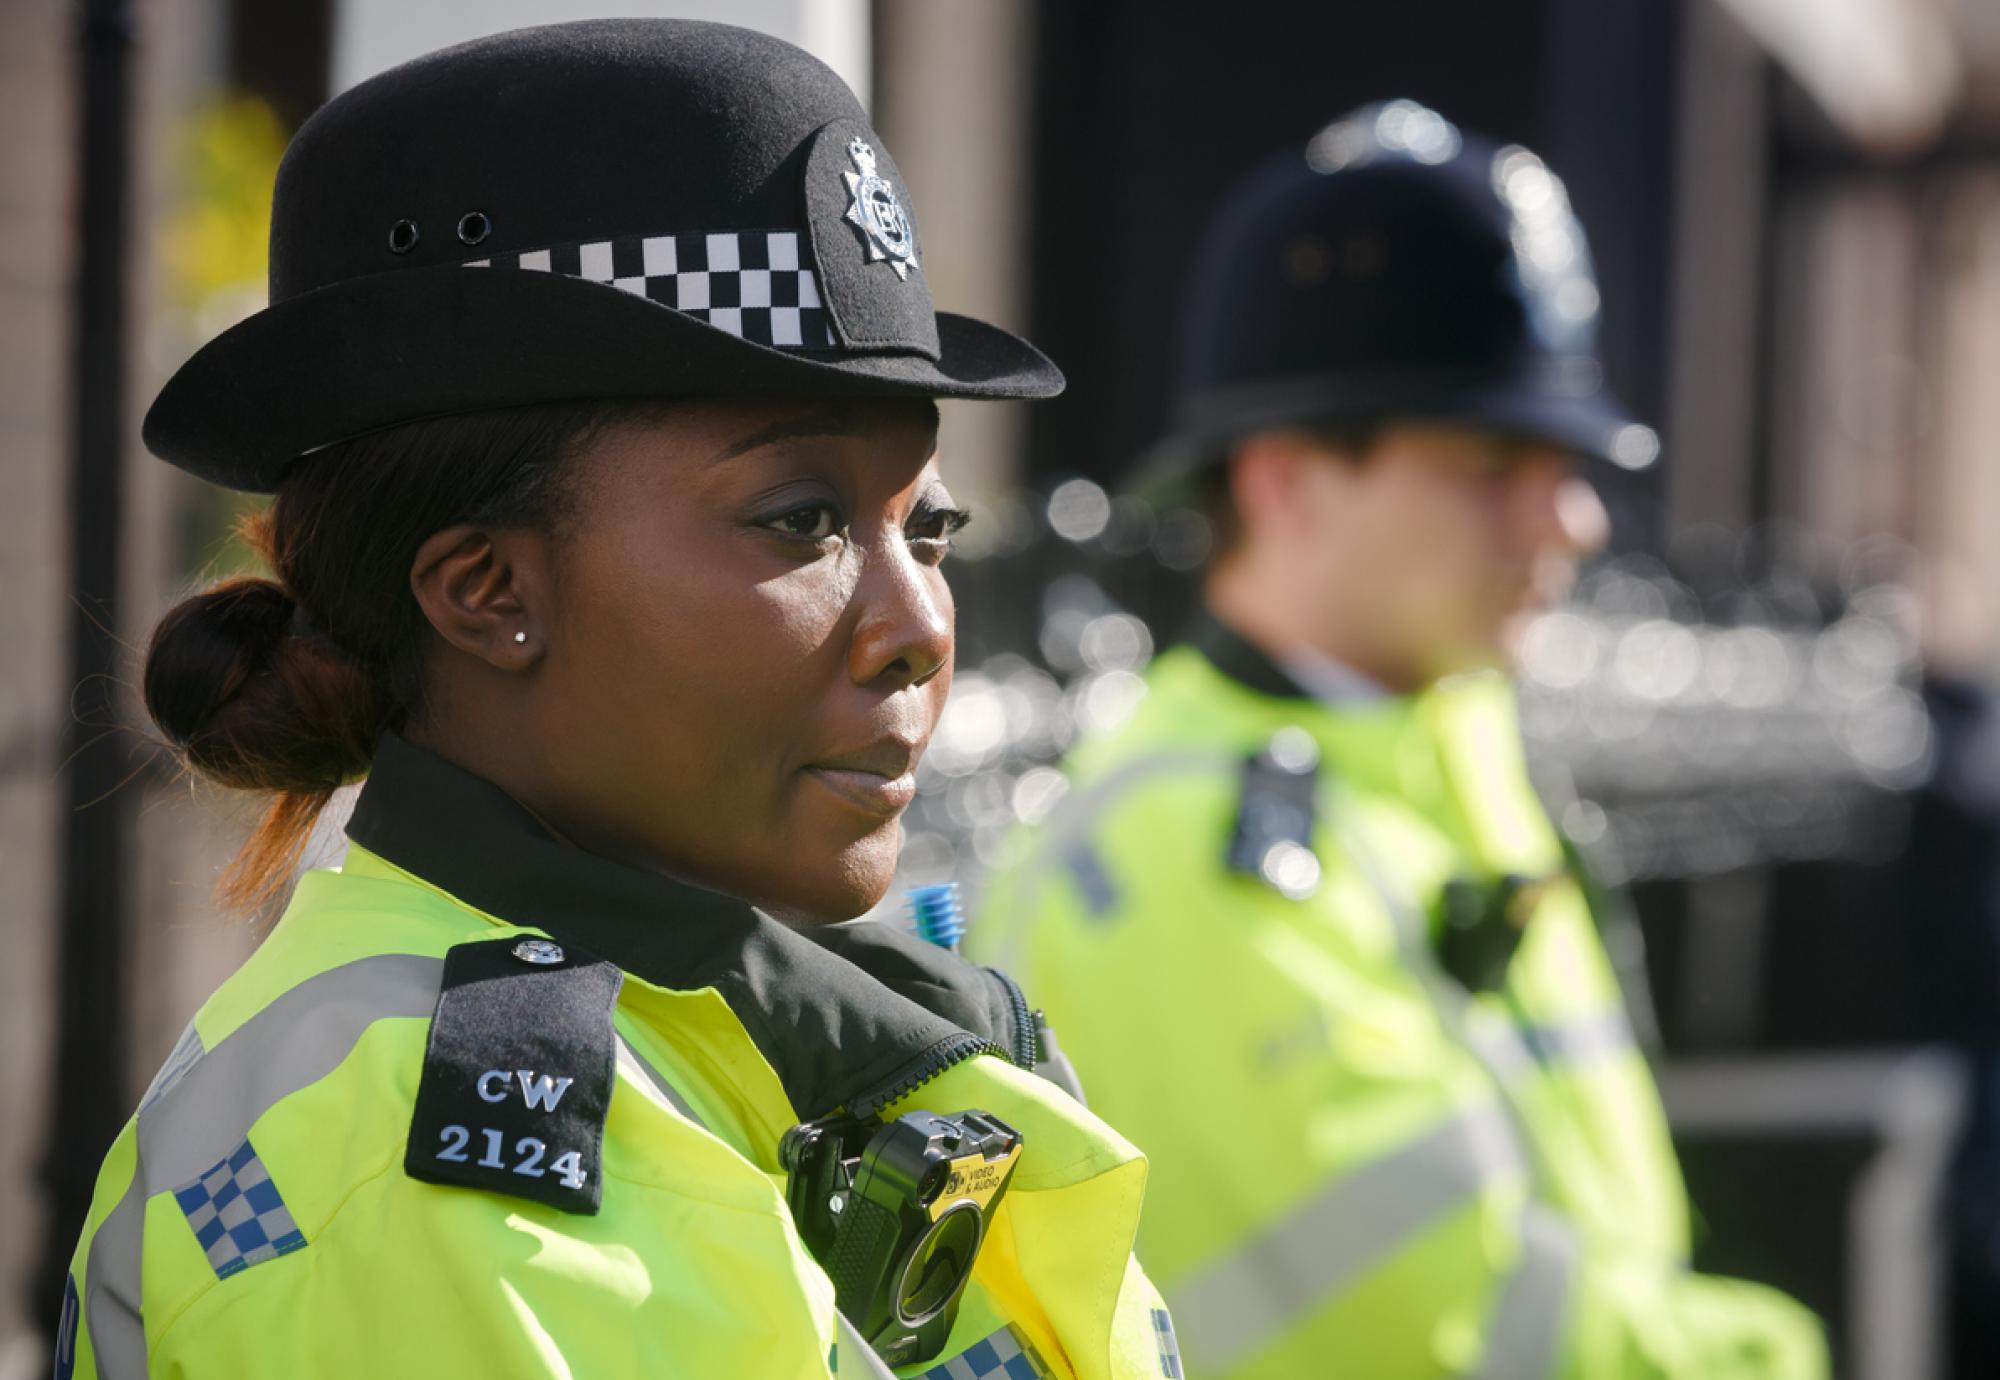 Police Officers in the UK